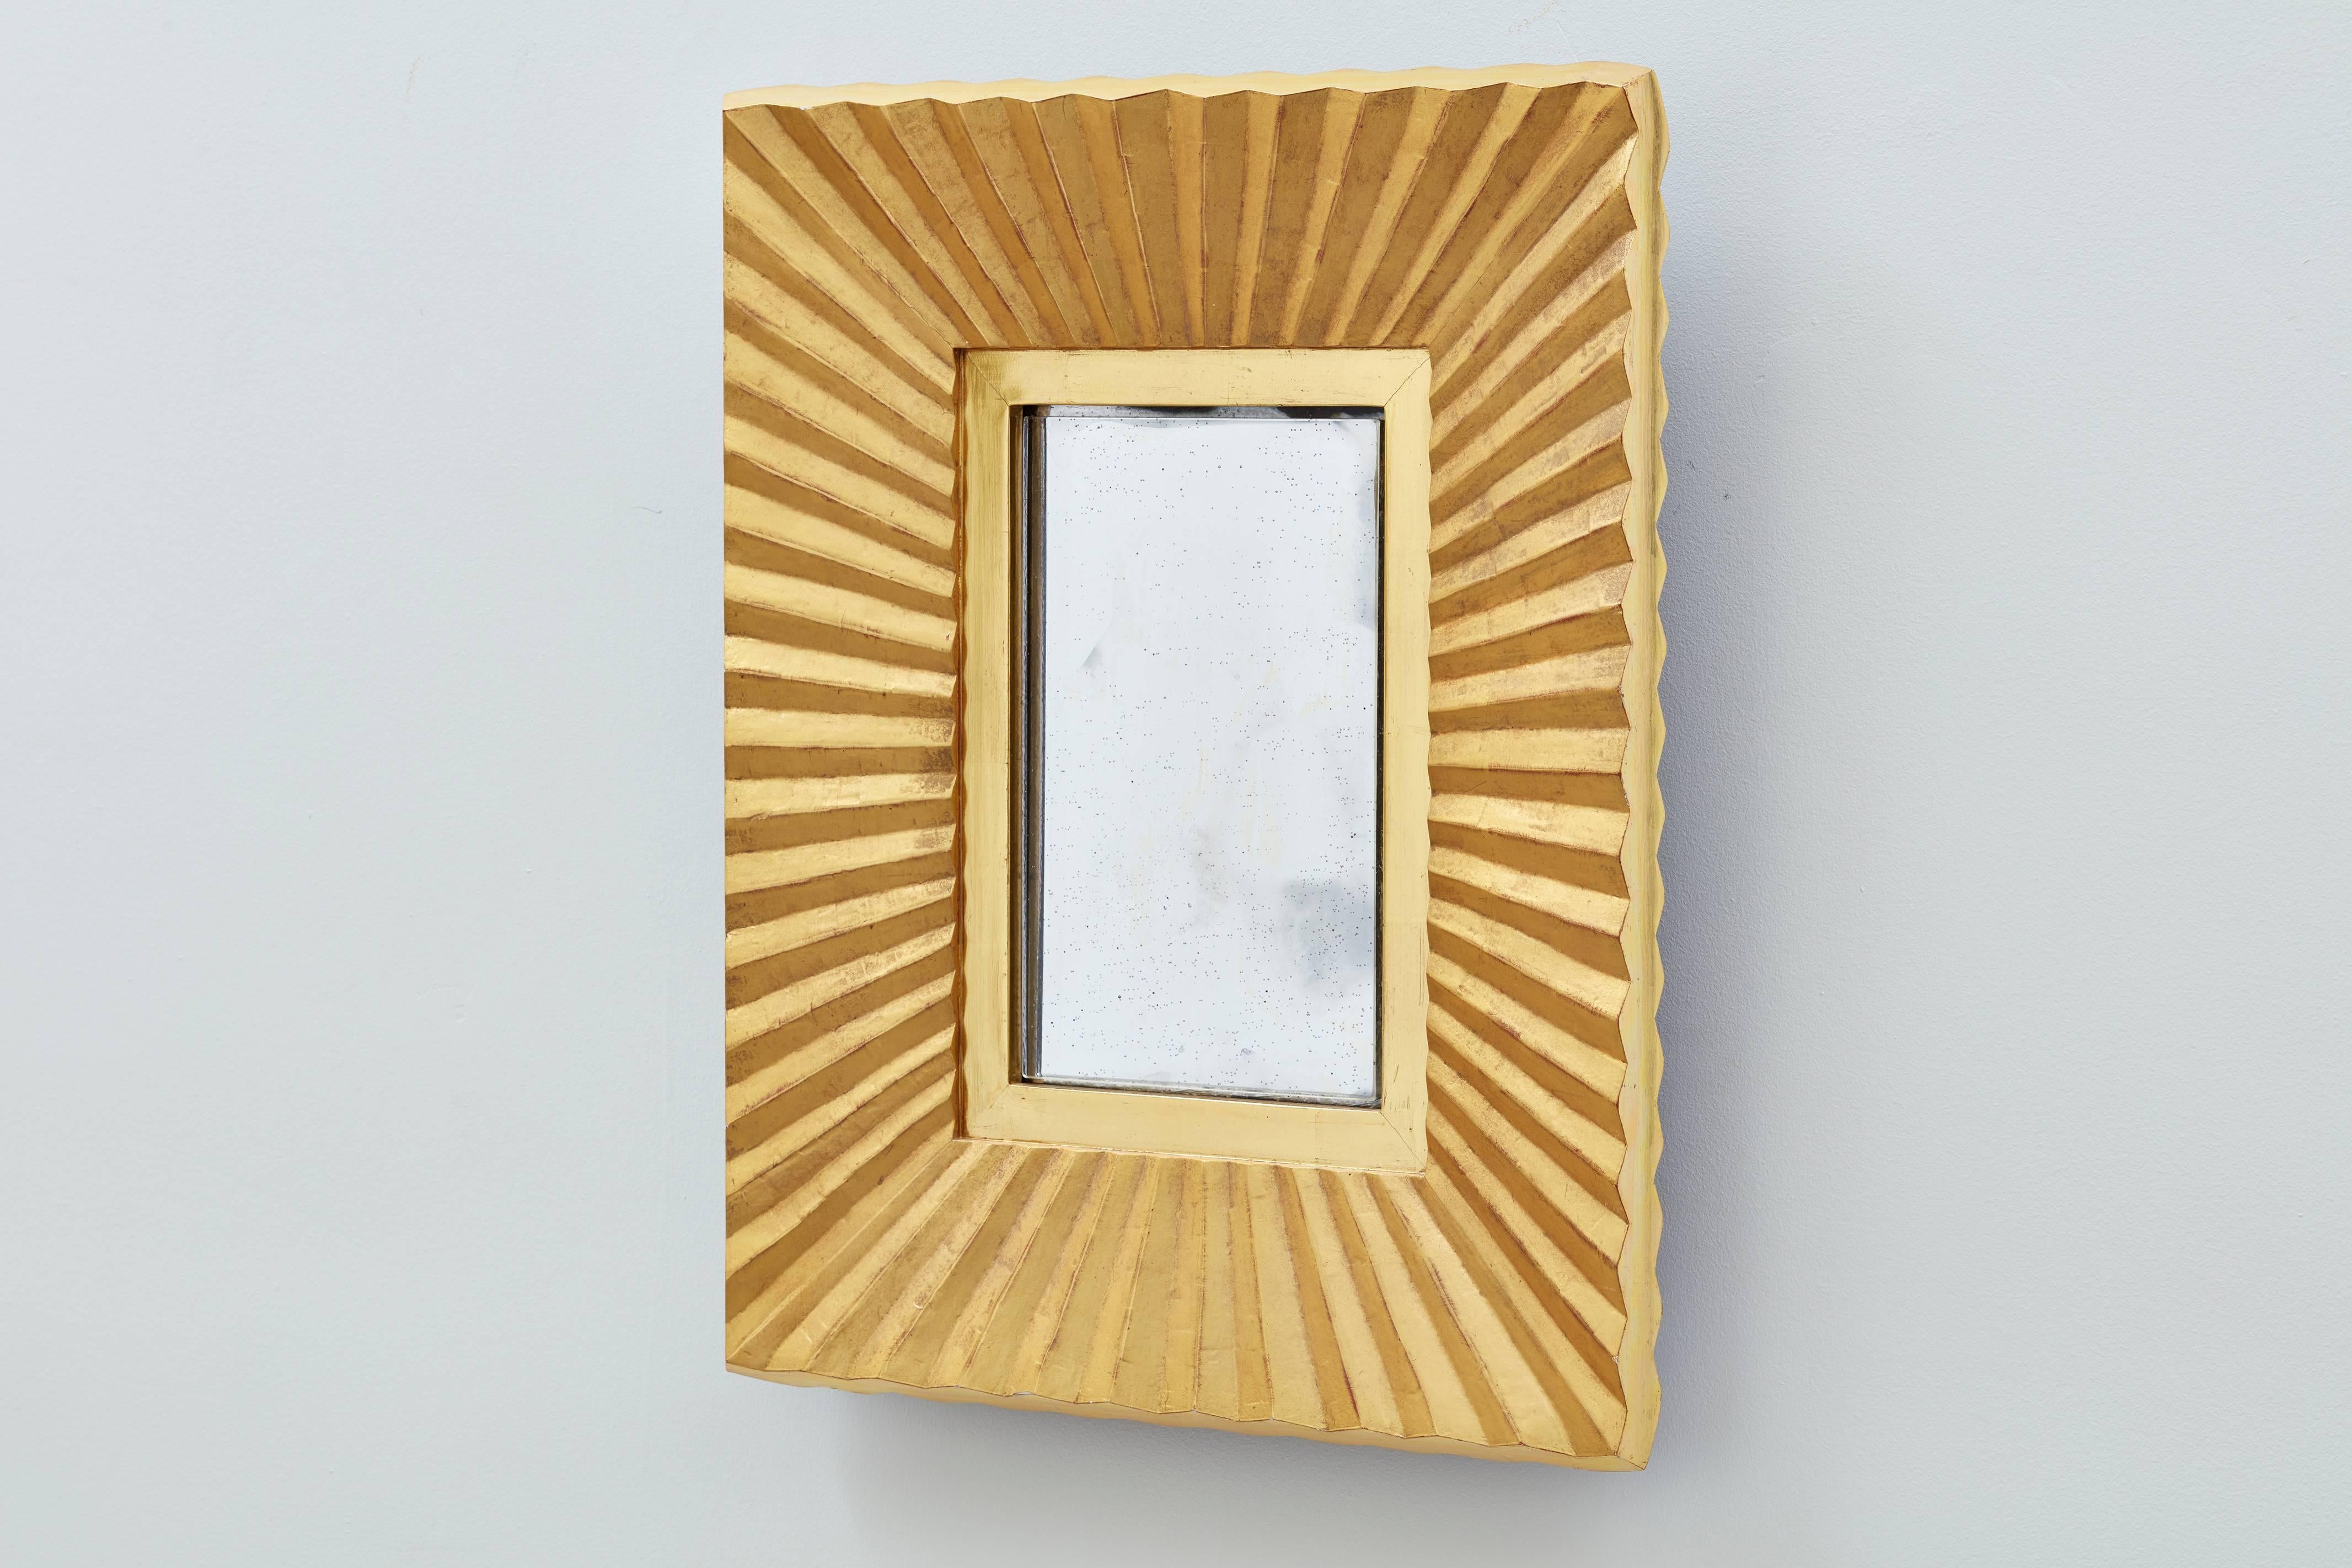 Pleated facets inform the name of this Bark Frameworks mirror, which was designed by company founder and artist Jared Bark. The entire maple frame is gilded in 23-karat yellow gold over dark red bole (clay). The pleats are matte; the inner panel and